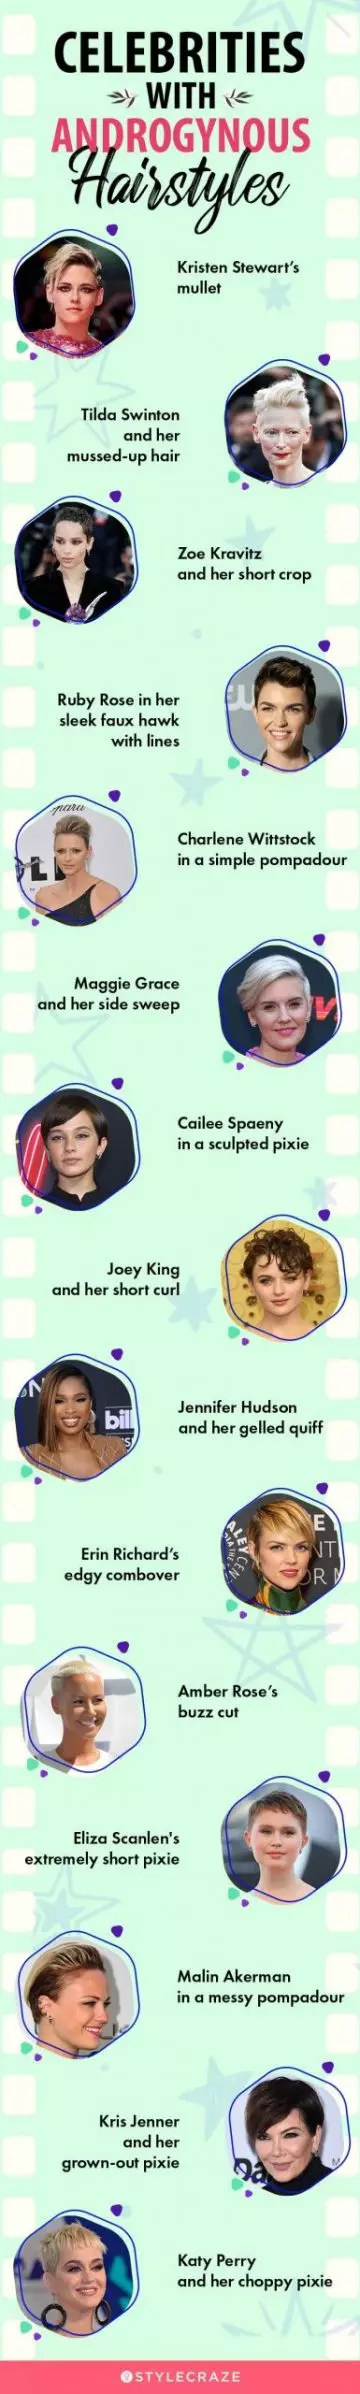 celebrities with androgynous hairstyles (infographic)